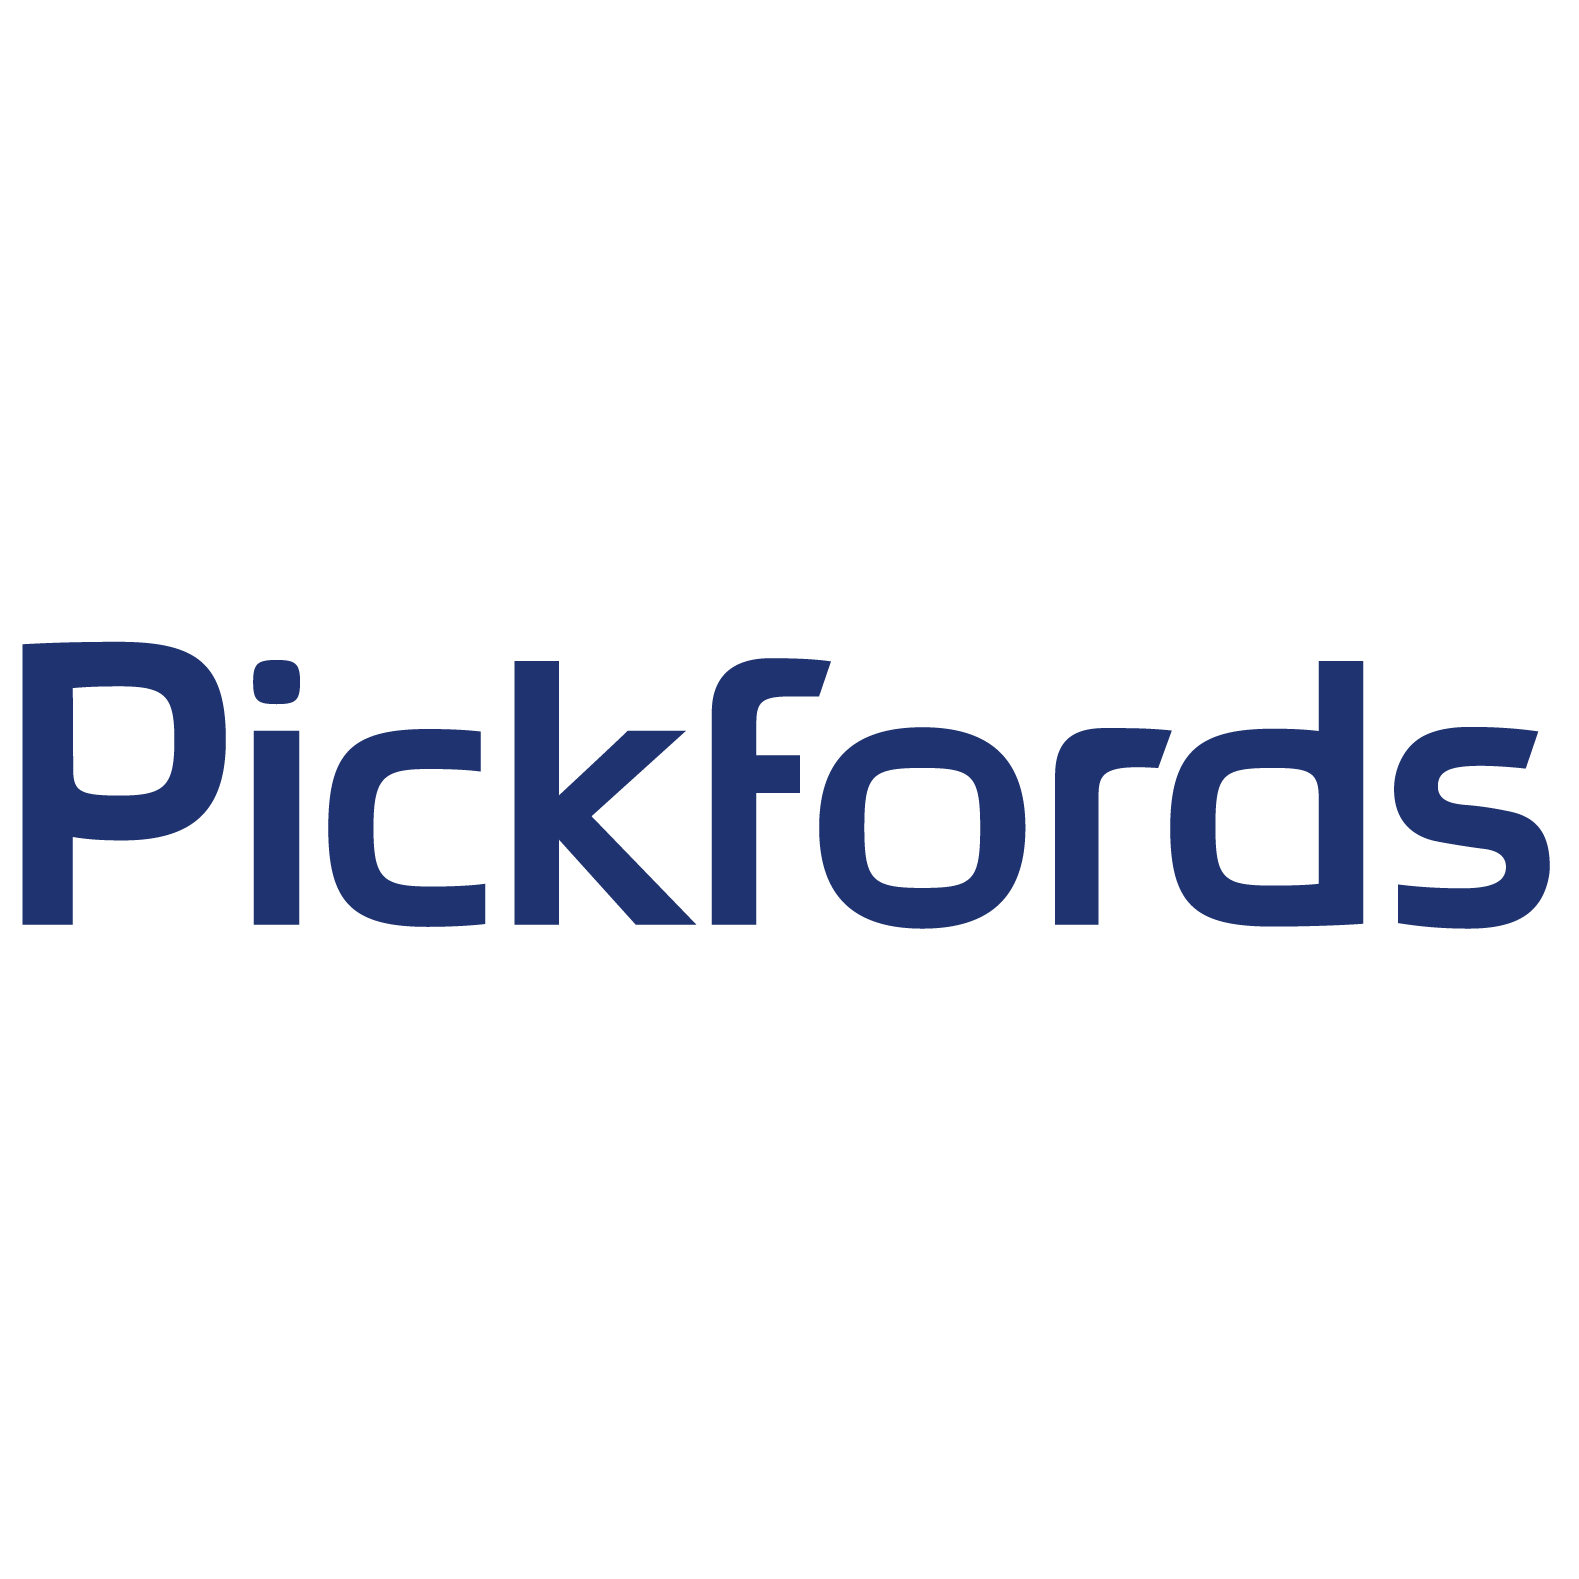 Pickfords Moving Logo Pickfords Moving and Storage Leeds 01133 220748